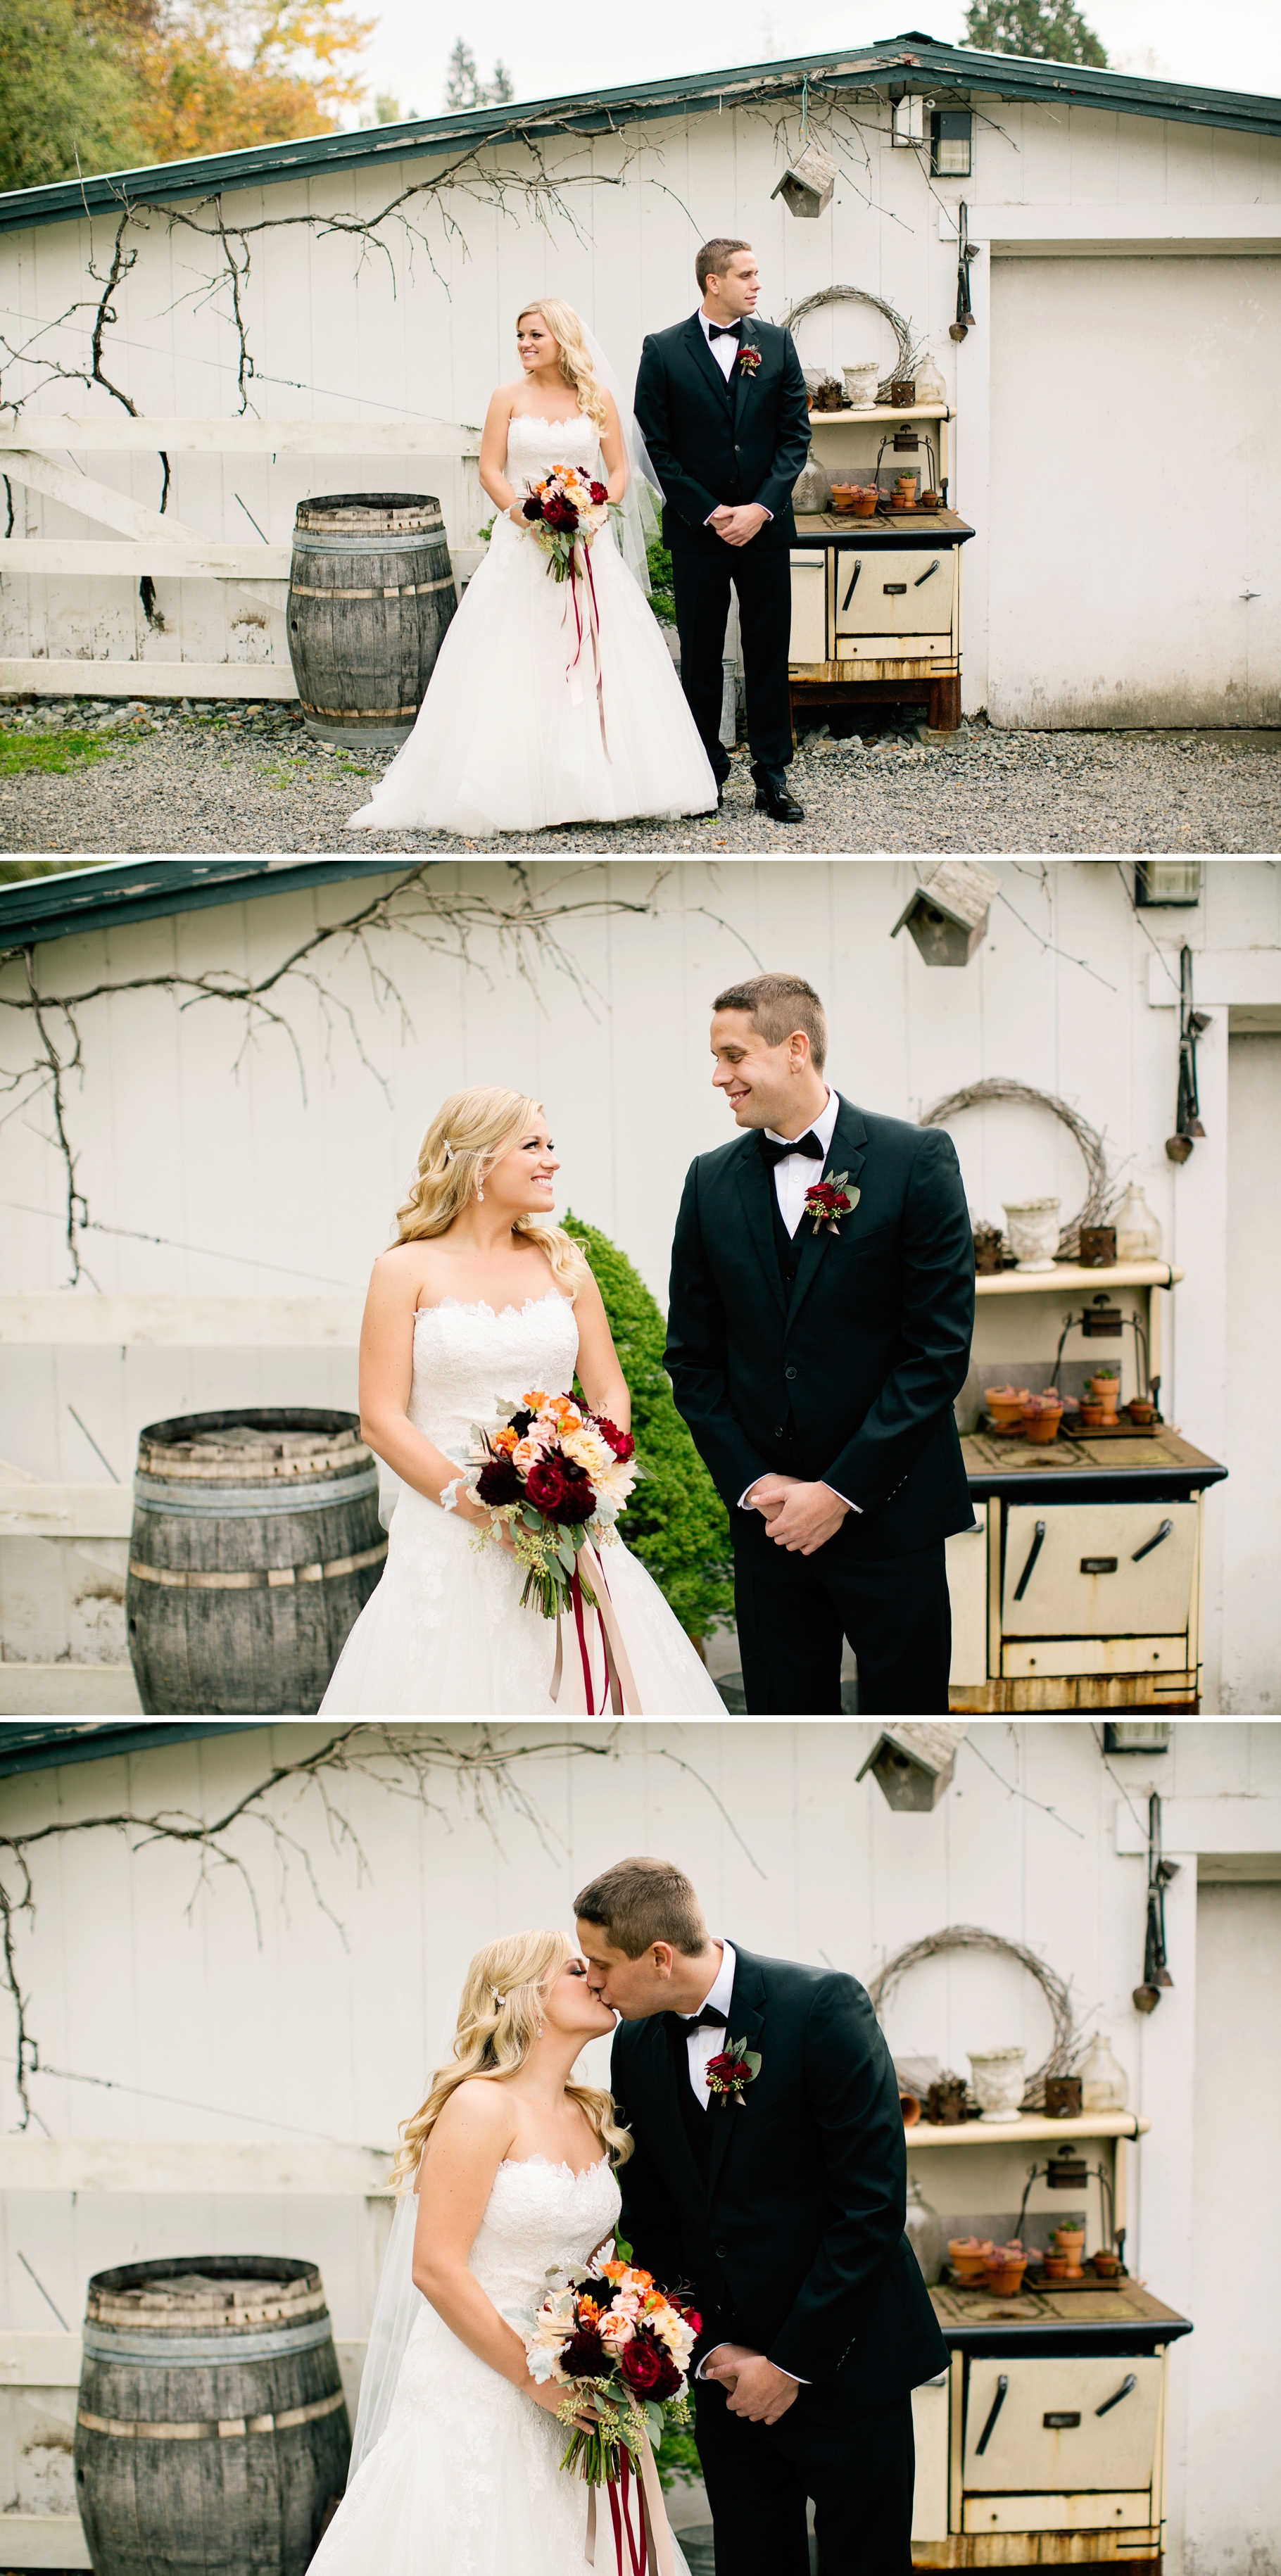 16-Bride-Groom-Portraits-Barn-Delille-Cellars-Chateau-Vineyard-Woodinville-Wedding-Photographer-Photography-by-Betty-Elaine